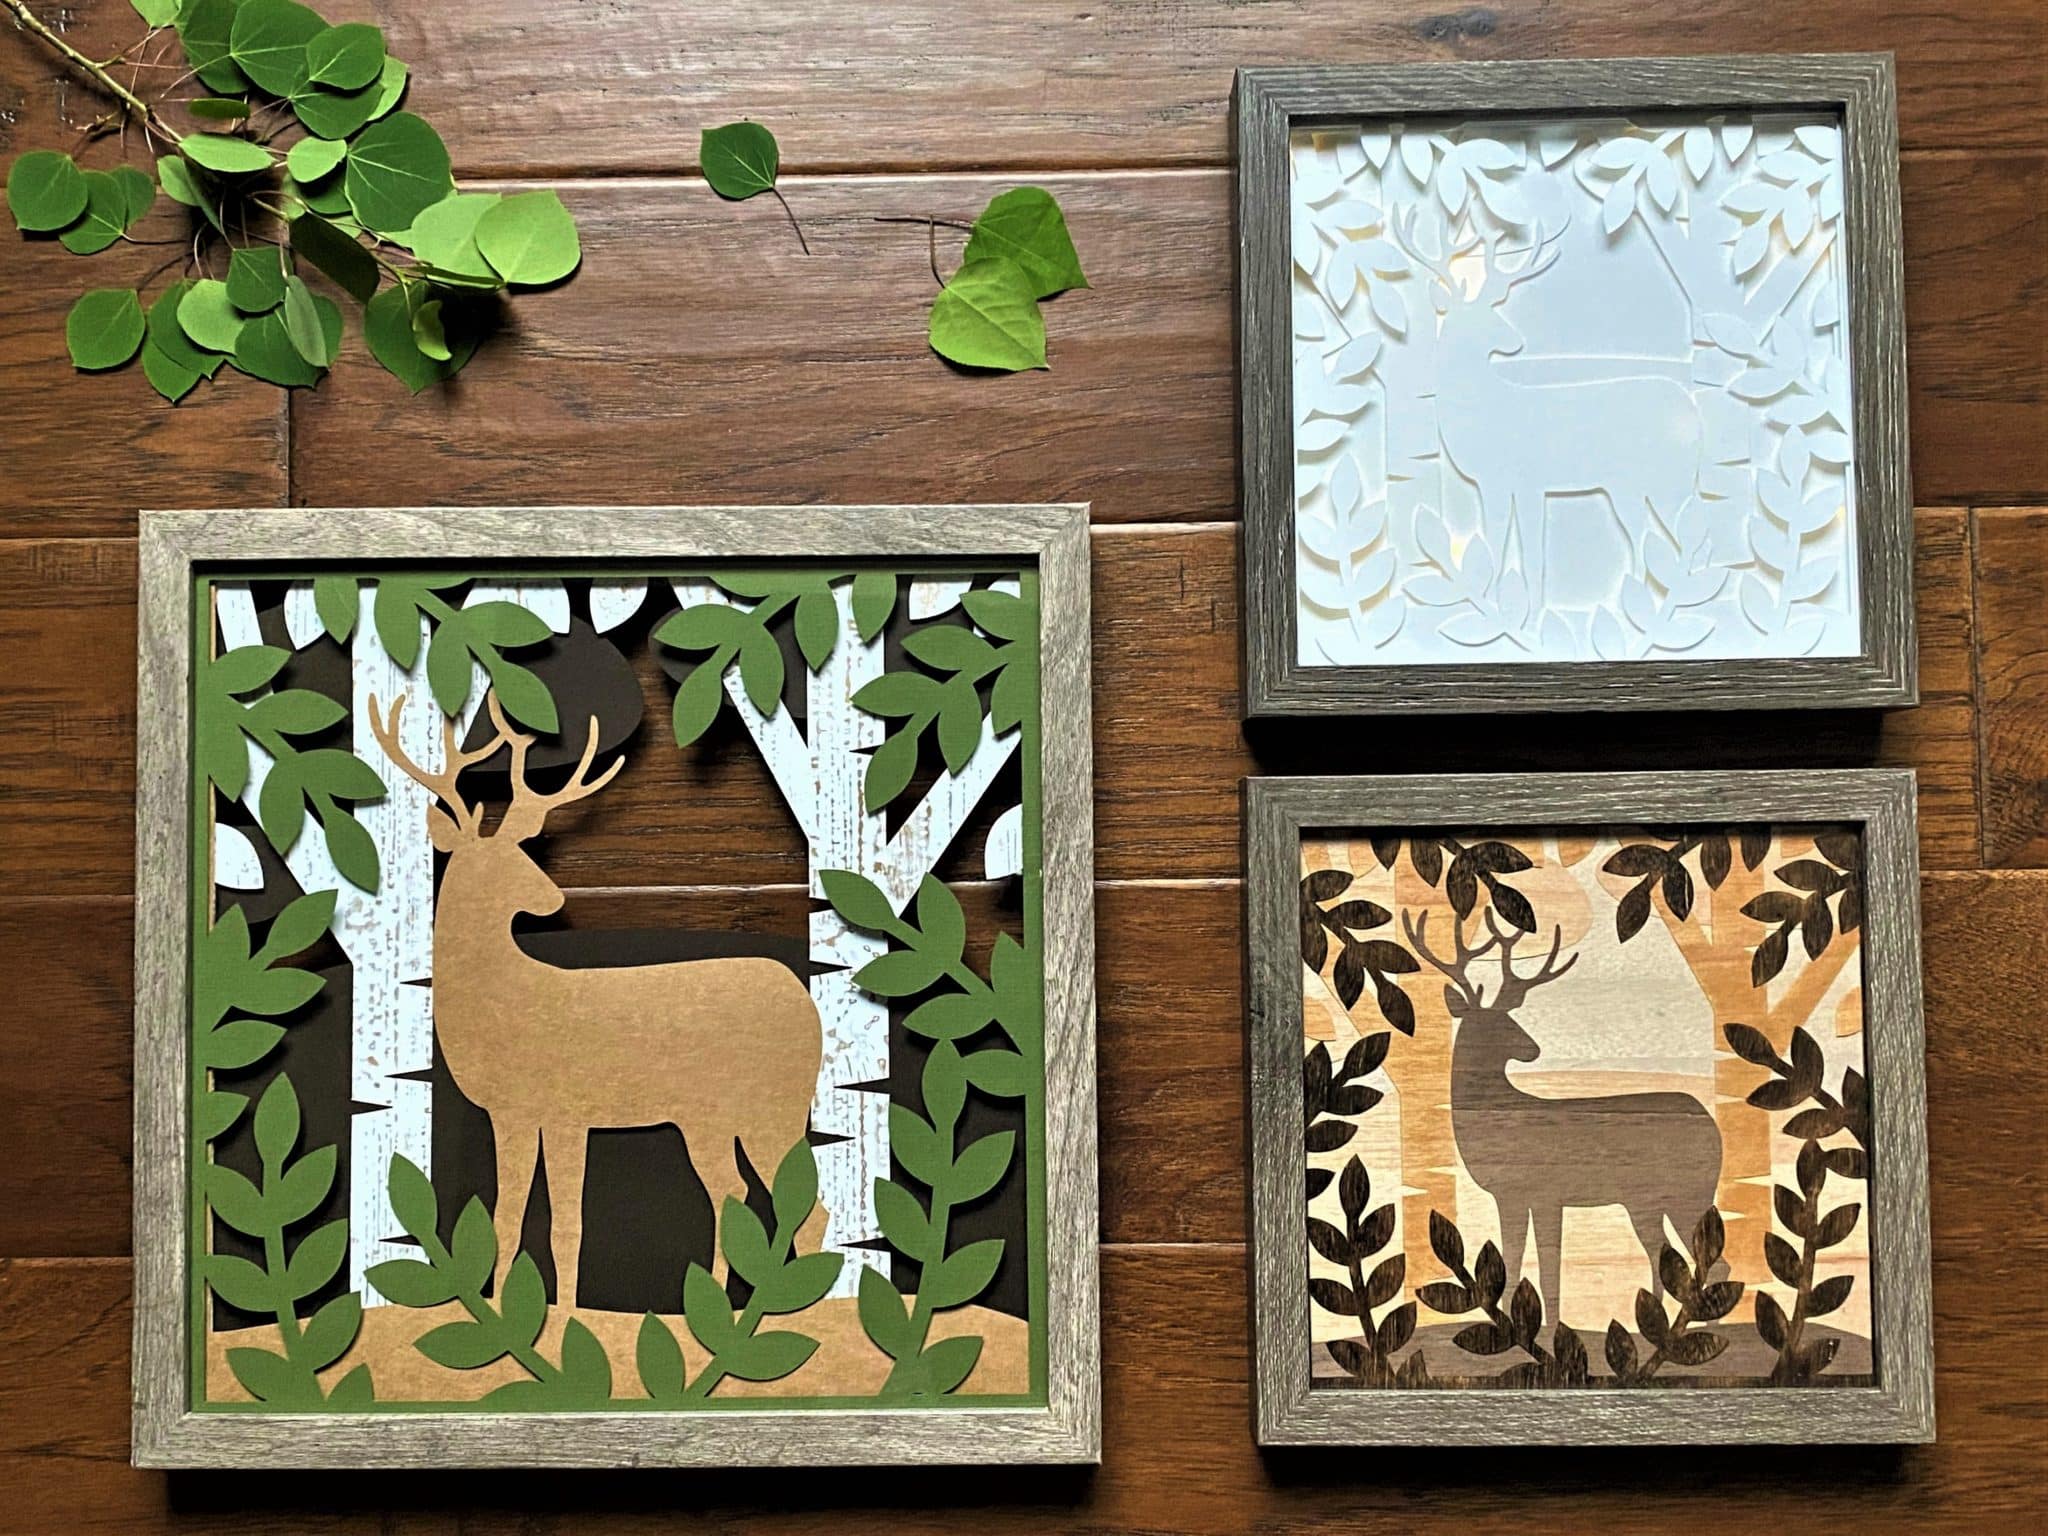 shadowboxes class with silhouette